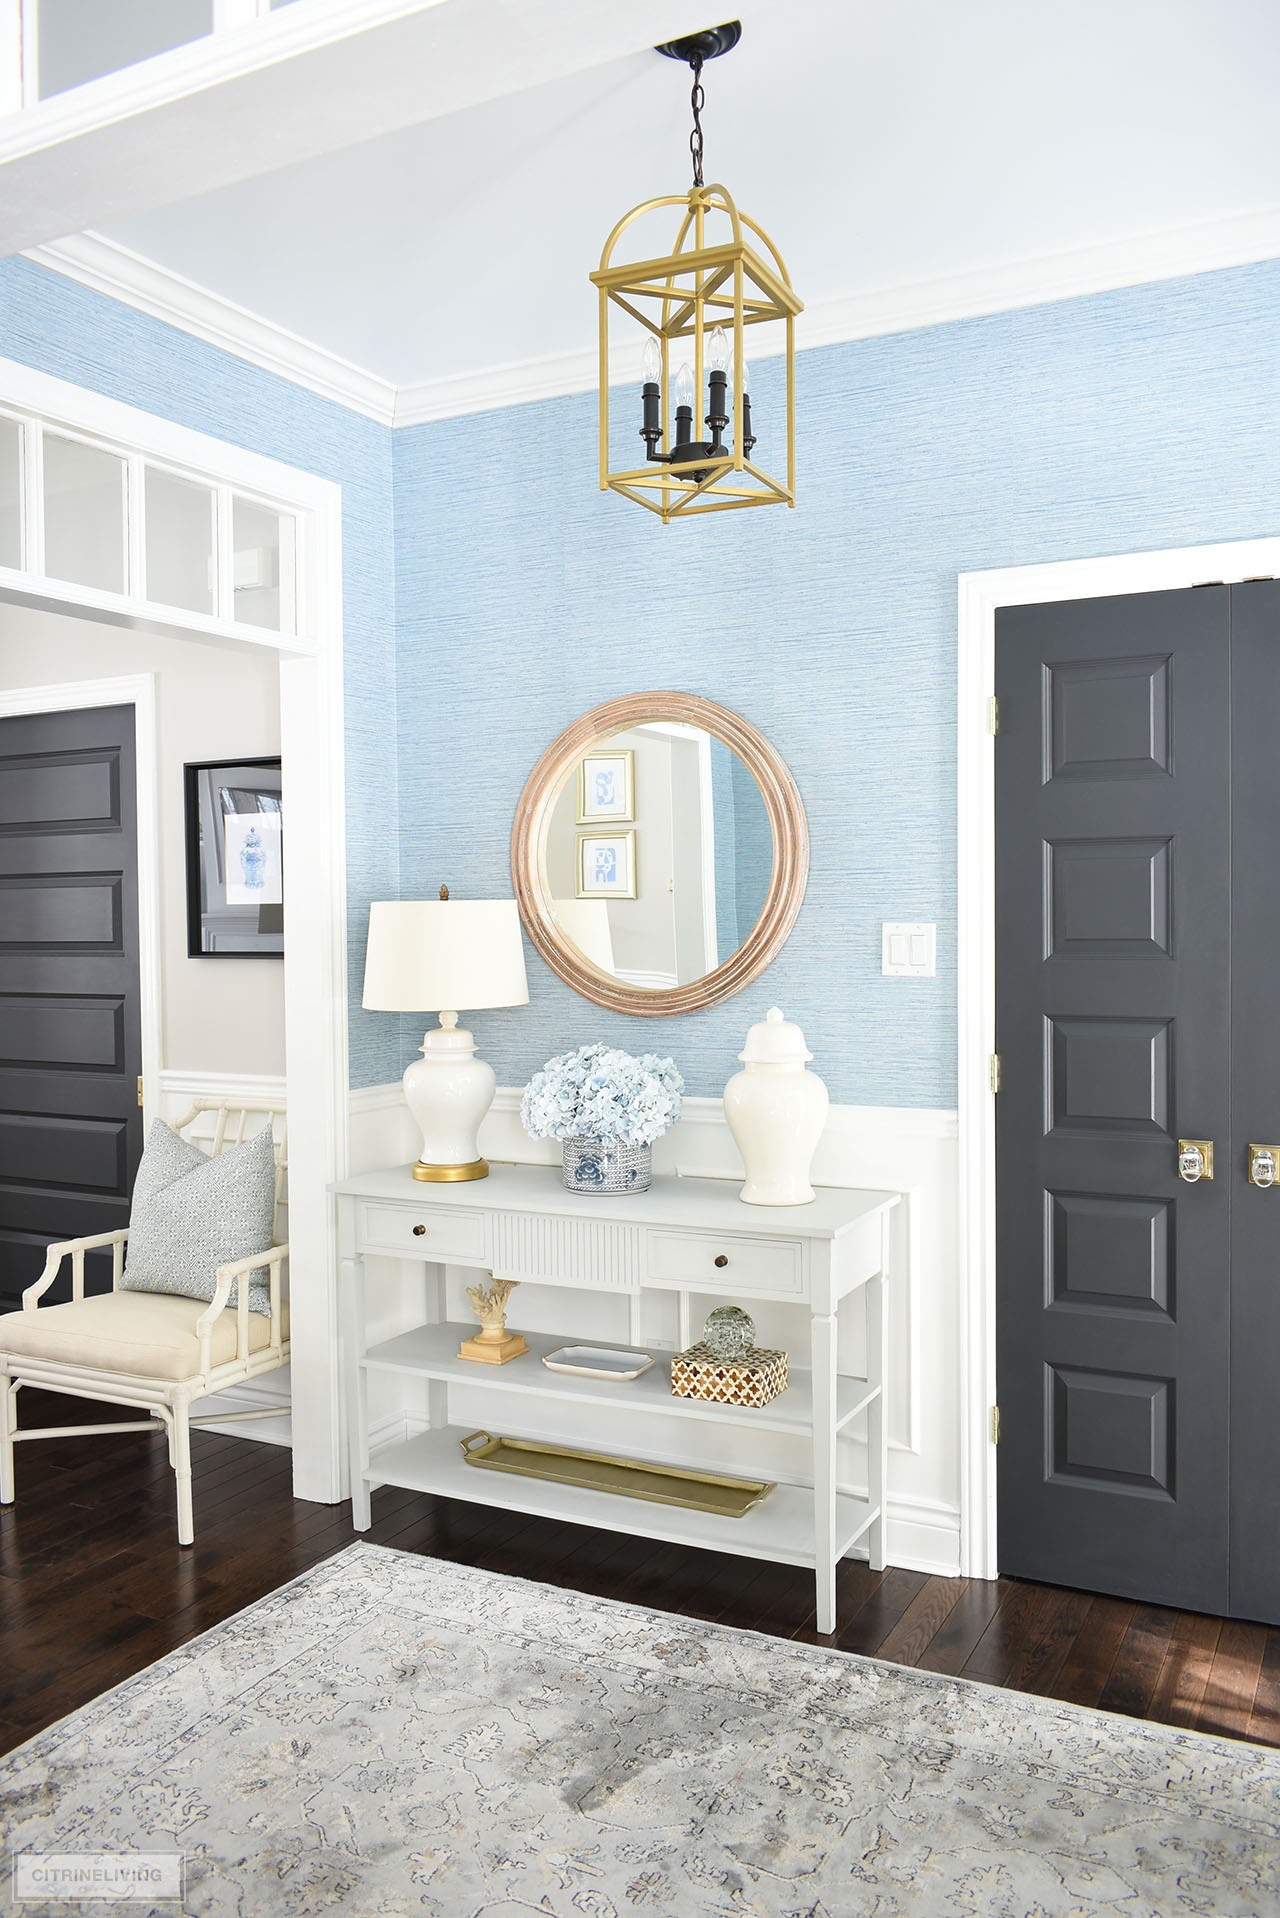 Spring entryway decor with a calming blue and white color palette is classic and beautiful.